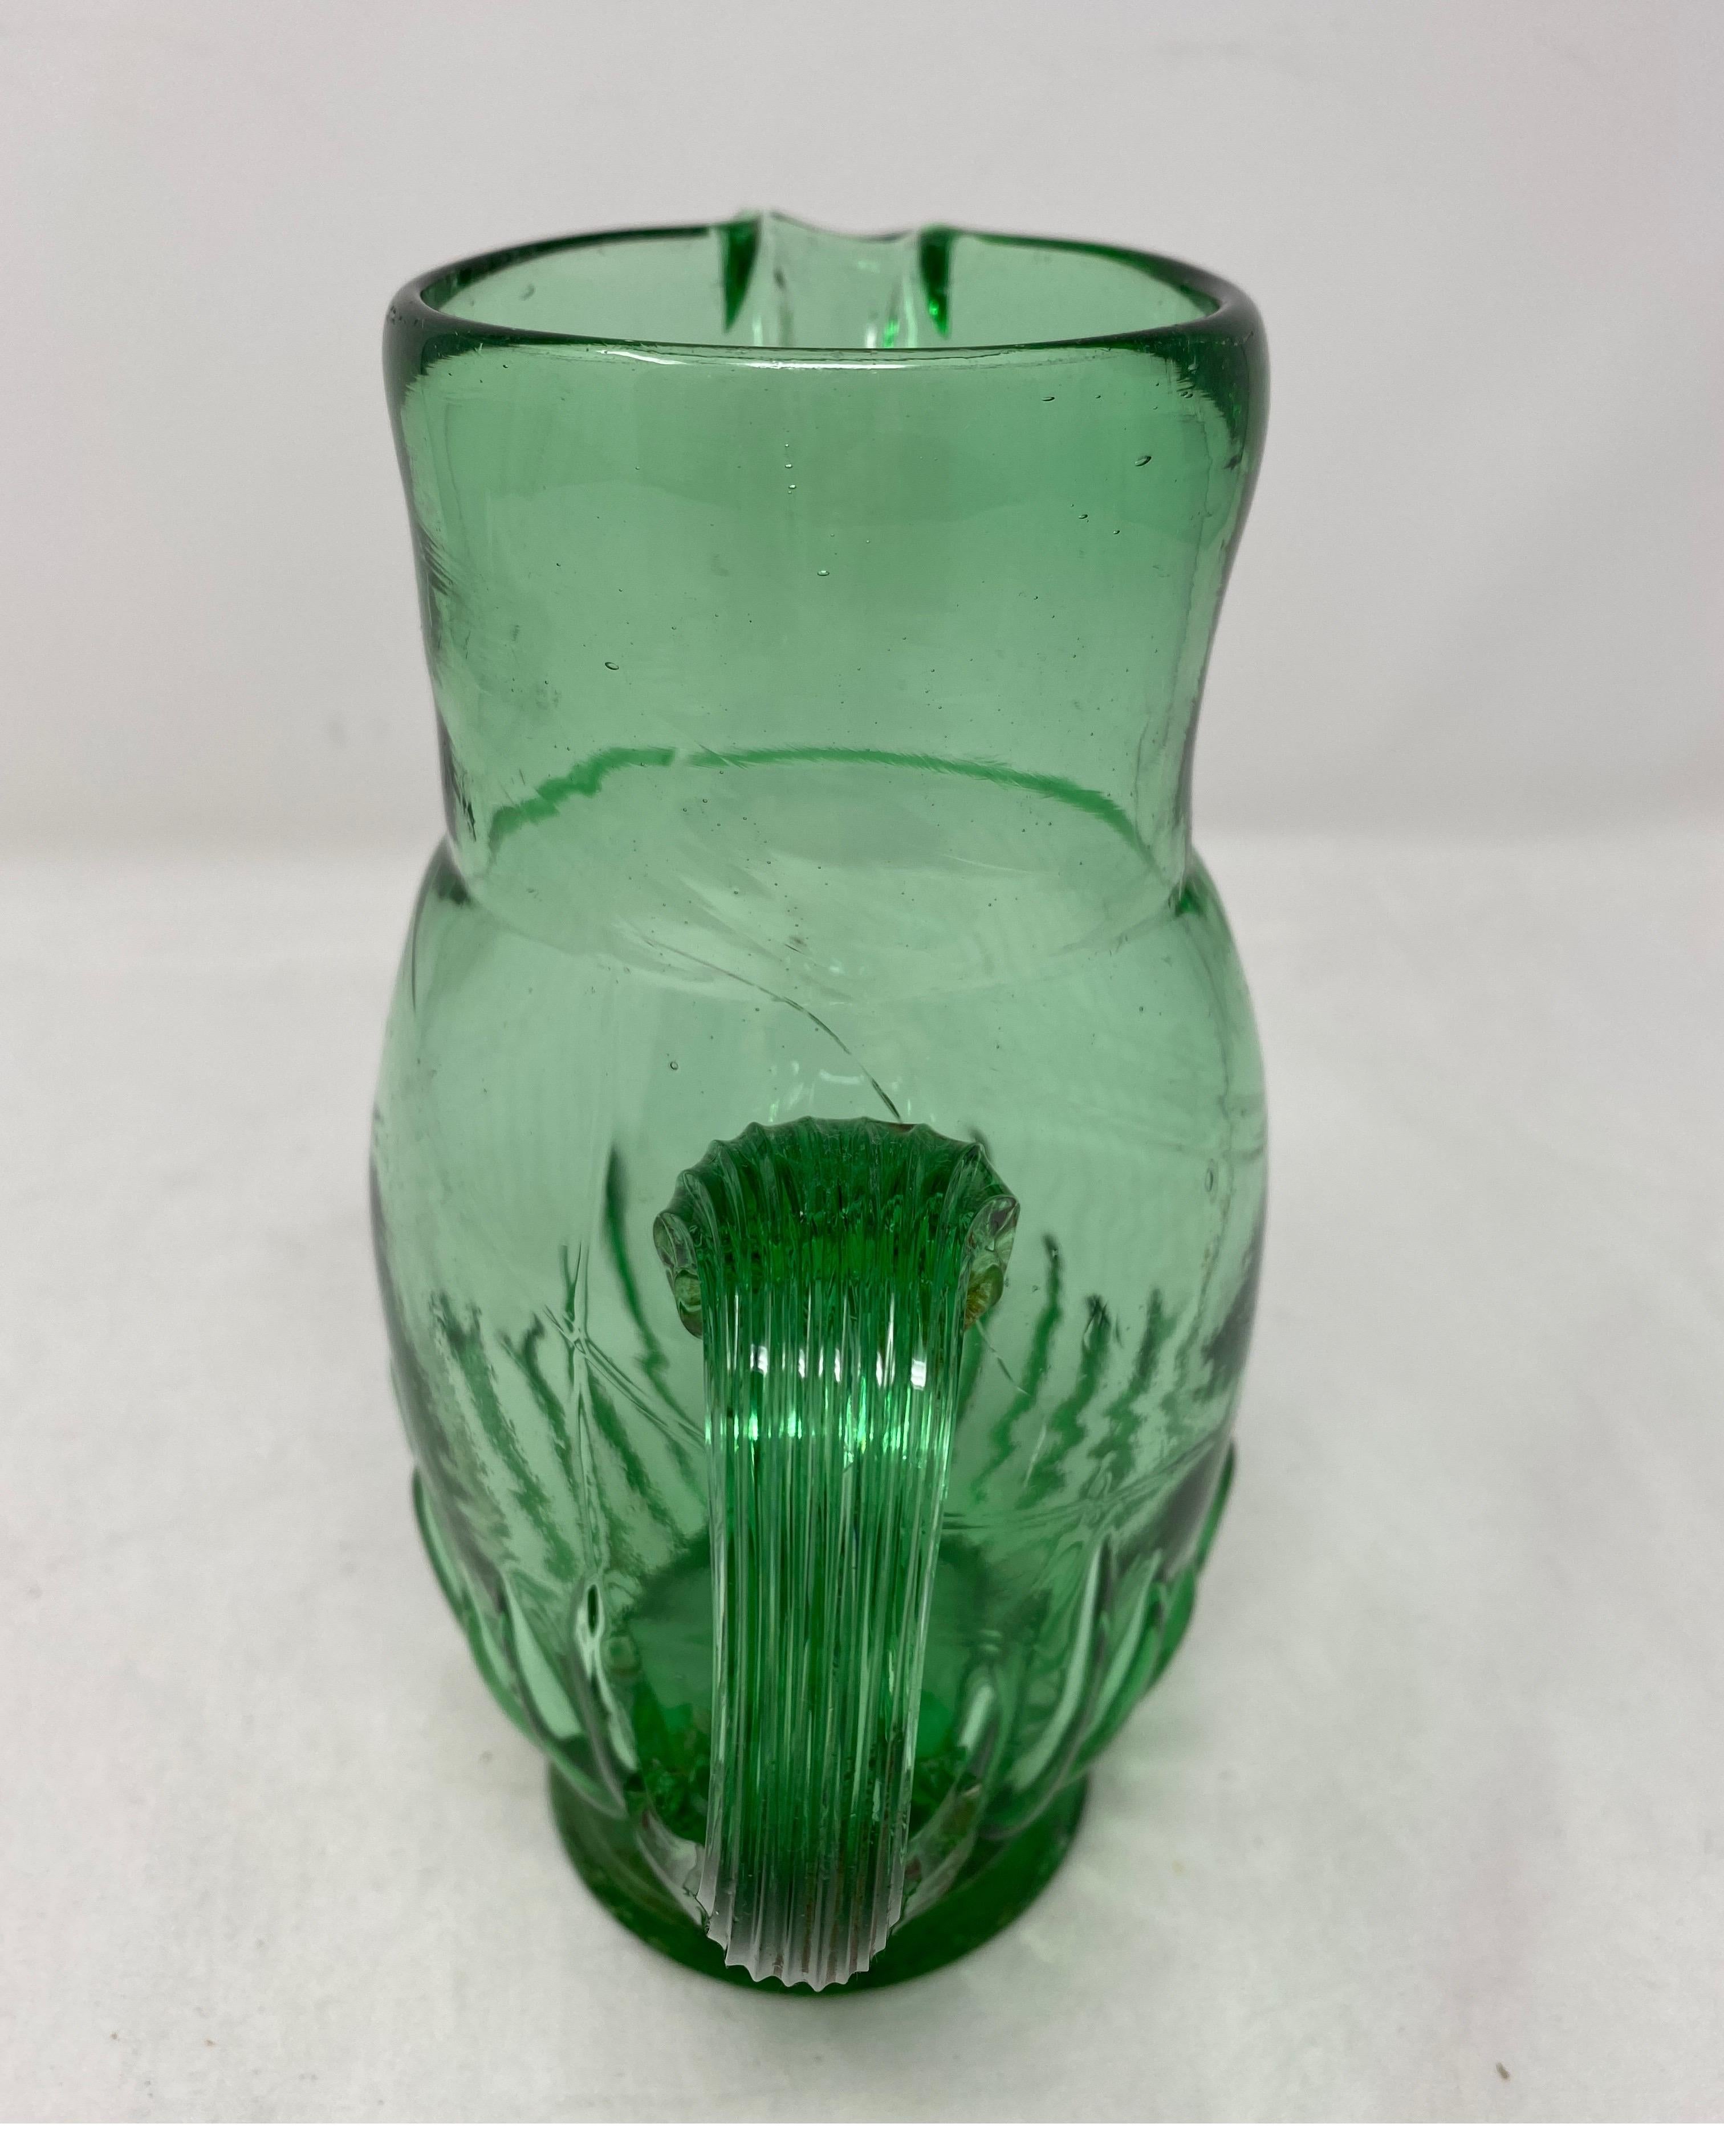 Small French green pitcher, 19th century. Air bubbles and a small crack present.
5